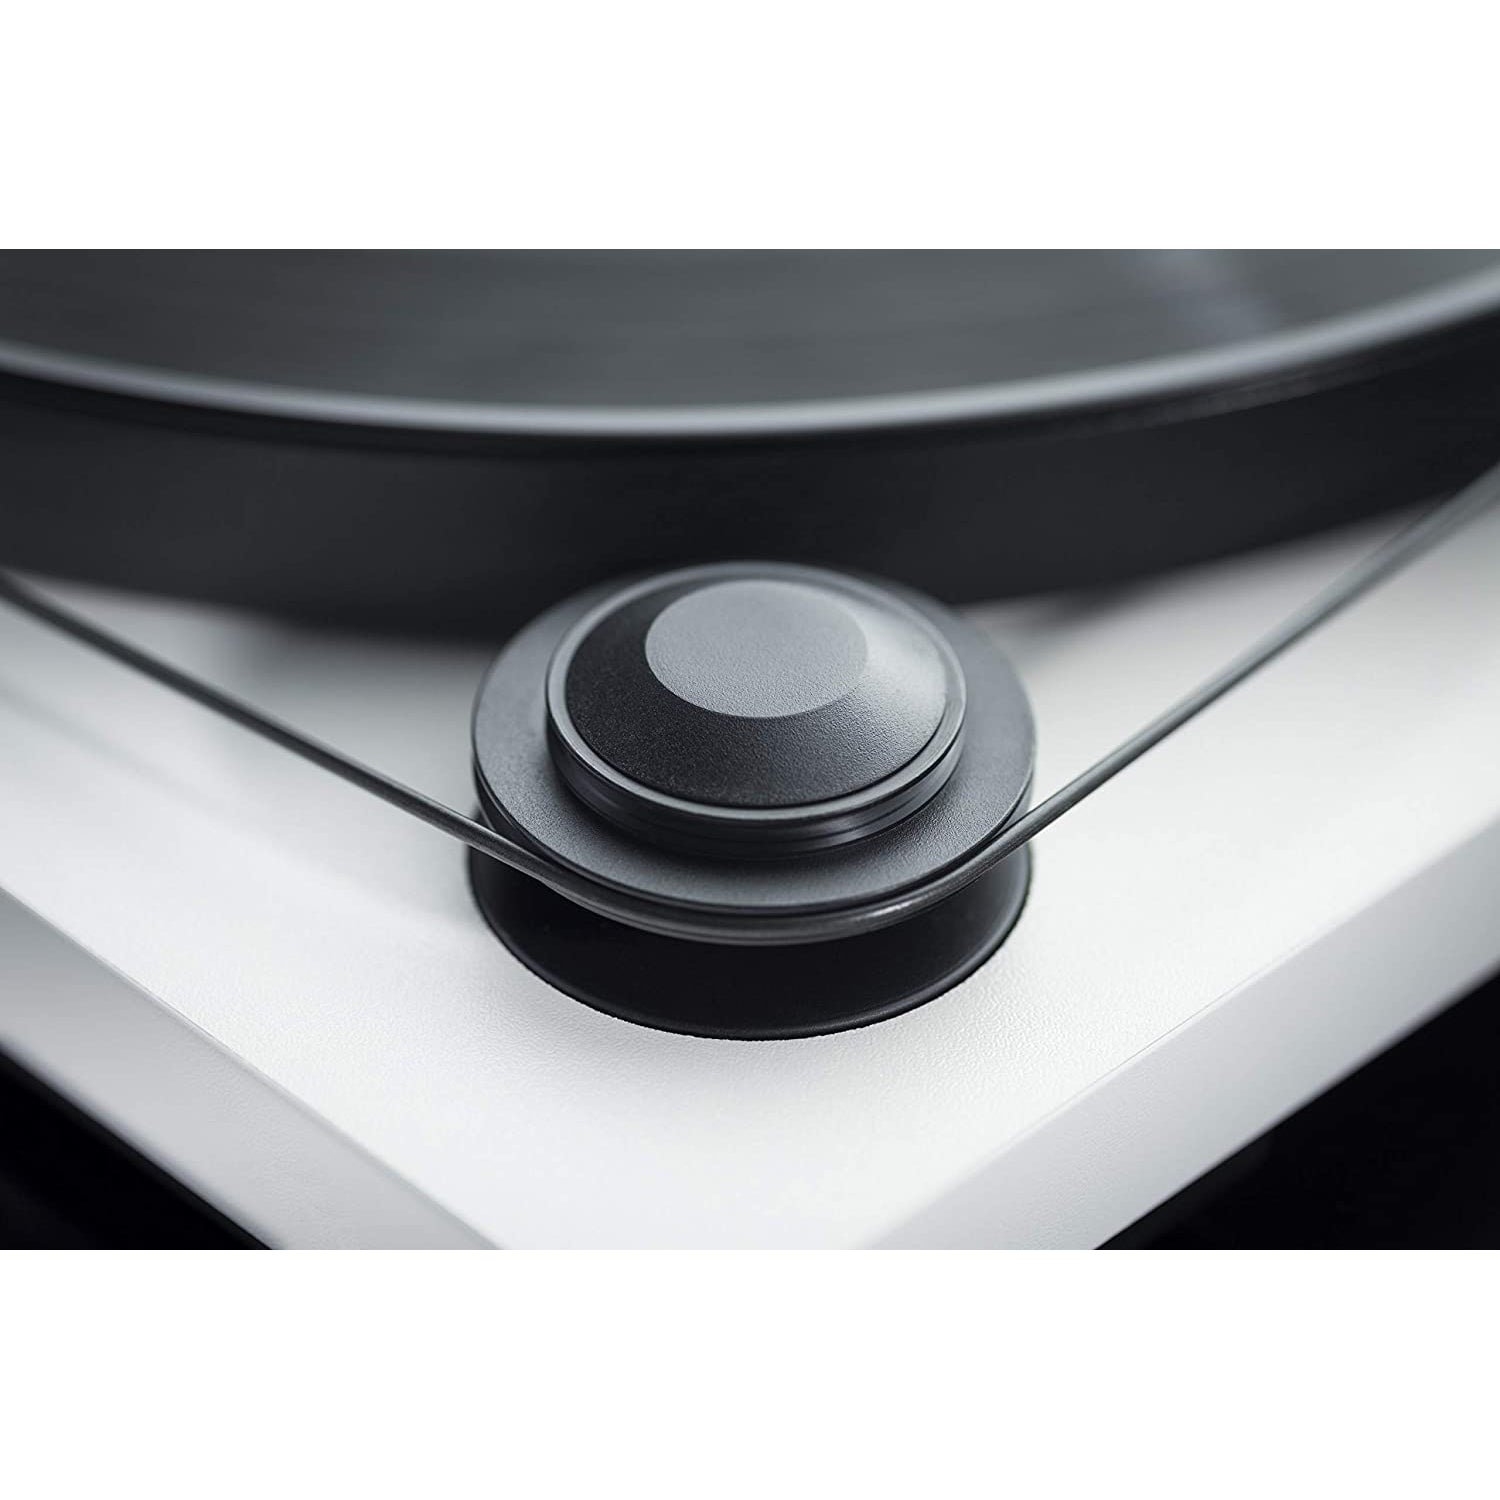 Pro-Ject Audio Systems Primary E Turntable, Black